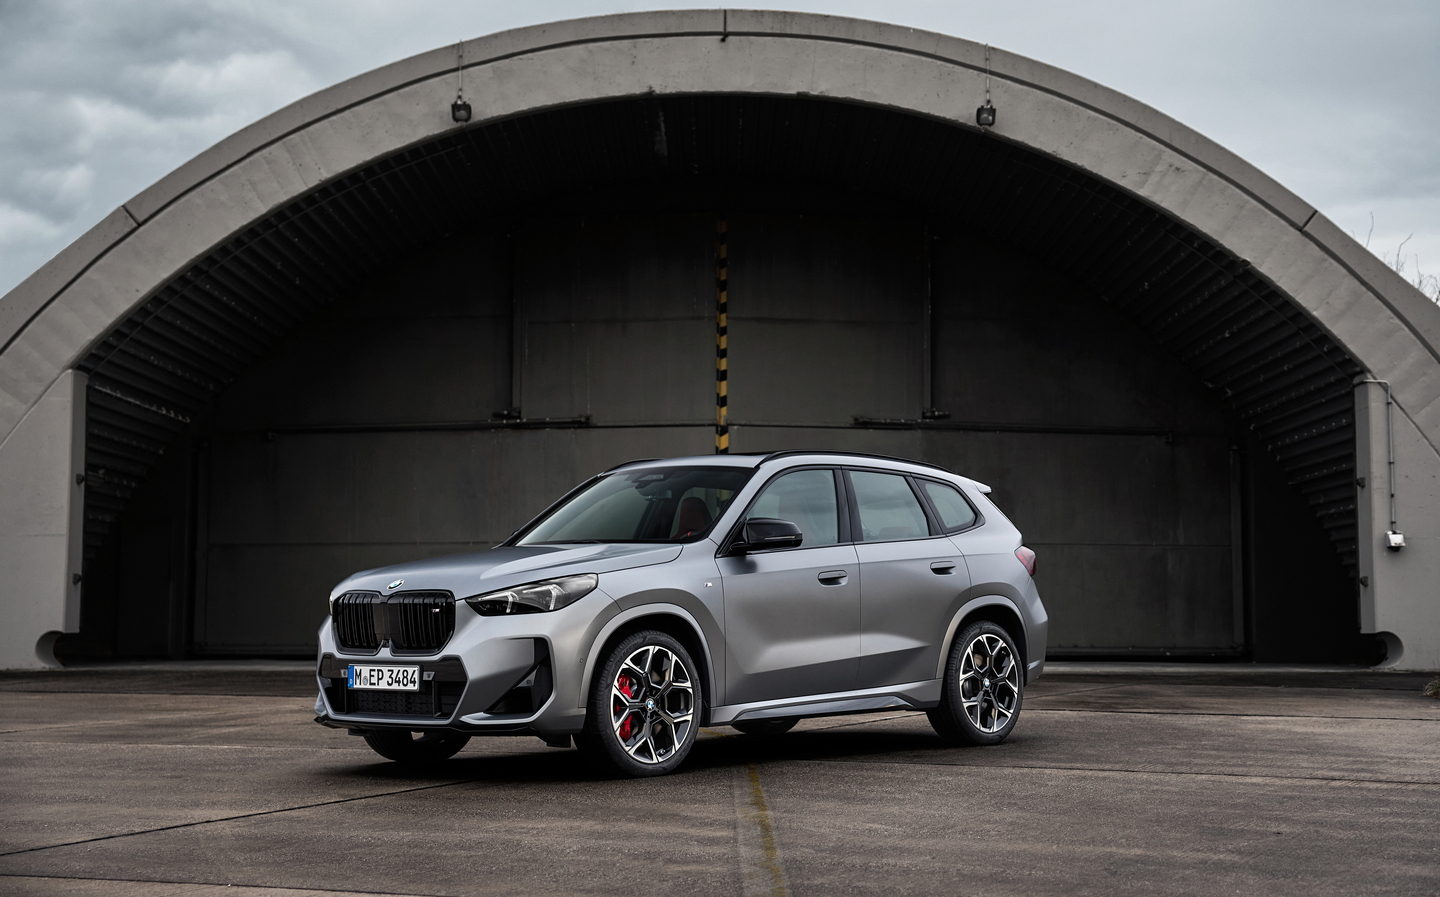 BMW's smallest SUV gets the M treatment — creating the 296bhp X1 M35i